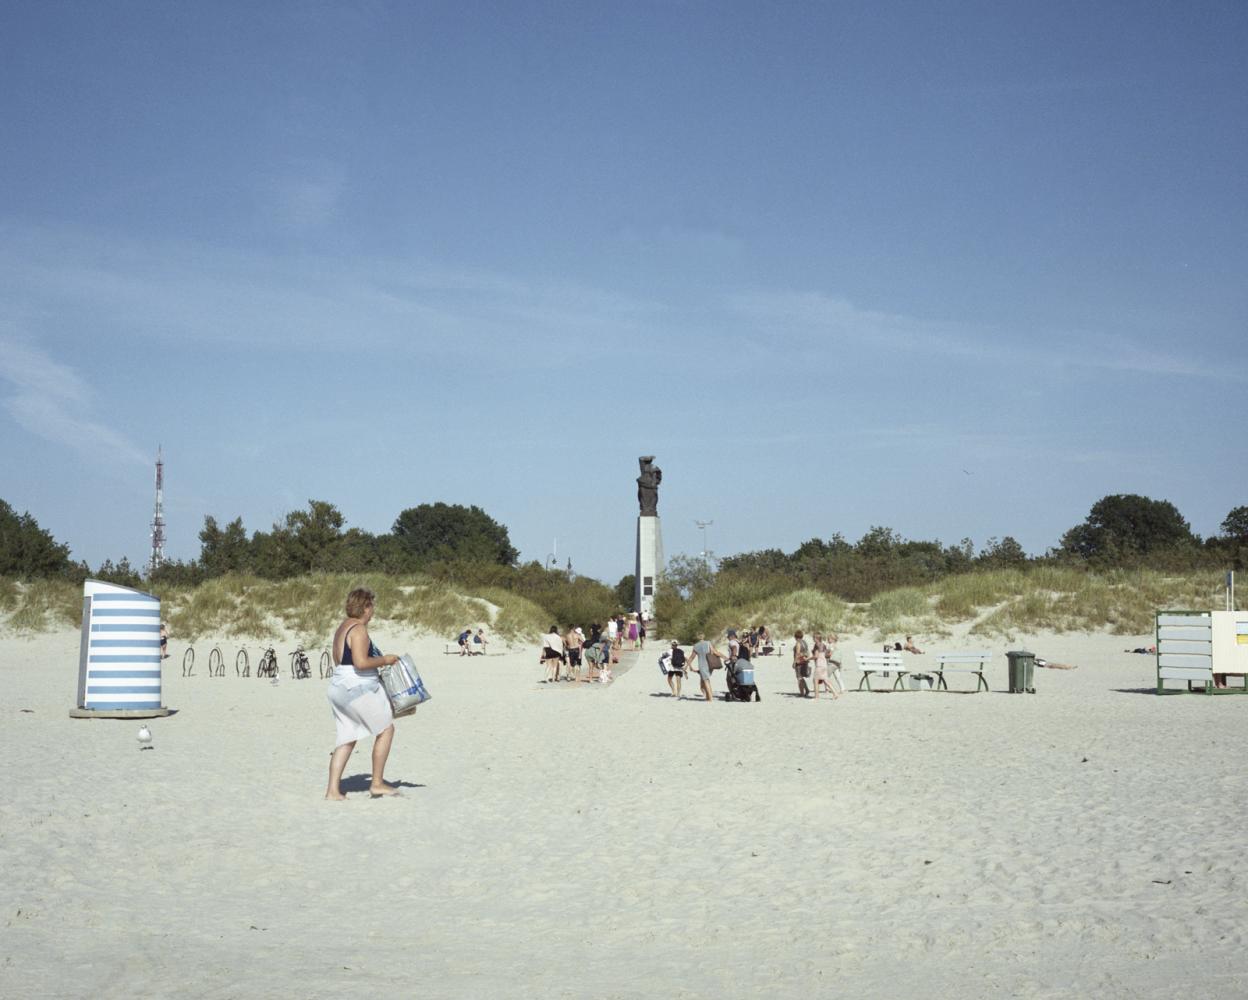  Latvia, Liepaja. August 2020. A view of Liepaja beach. In 1944, during the Second World War,...